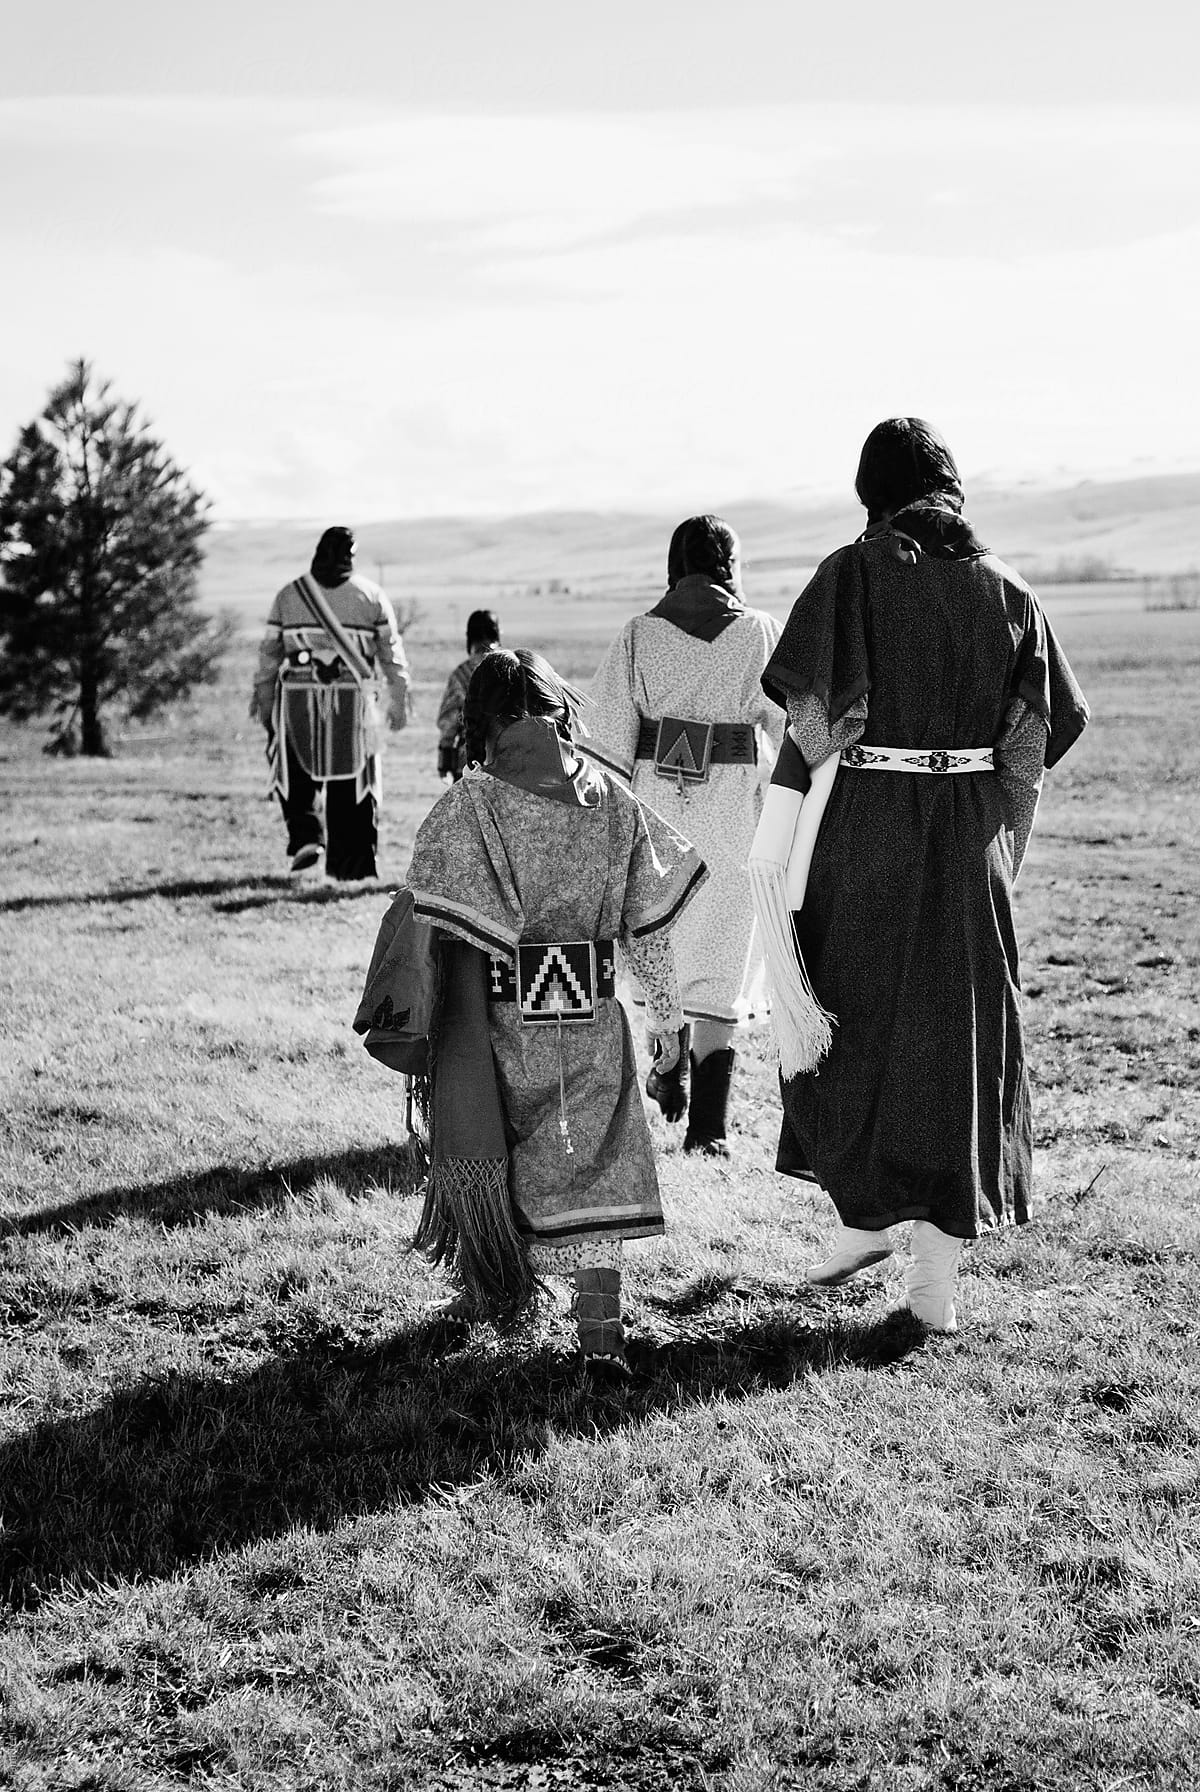 A Native American family walks together in a field